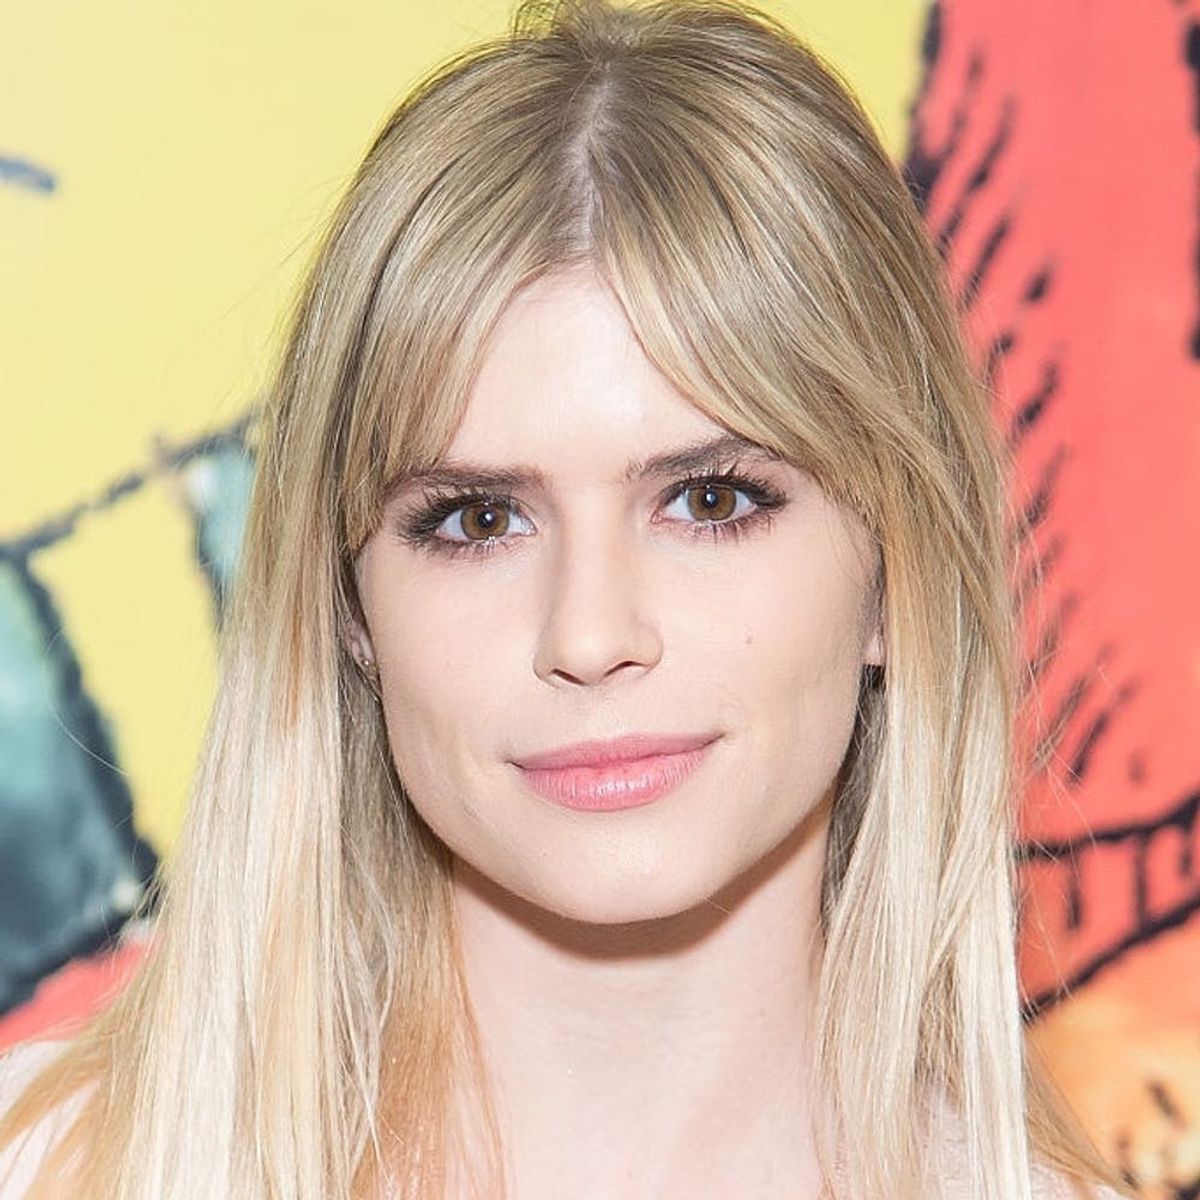 Get the Look of Carlson Young’s Pinterest-Perfect Apartment